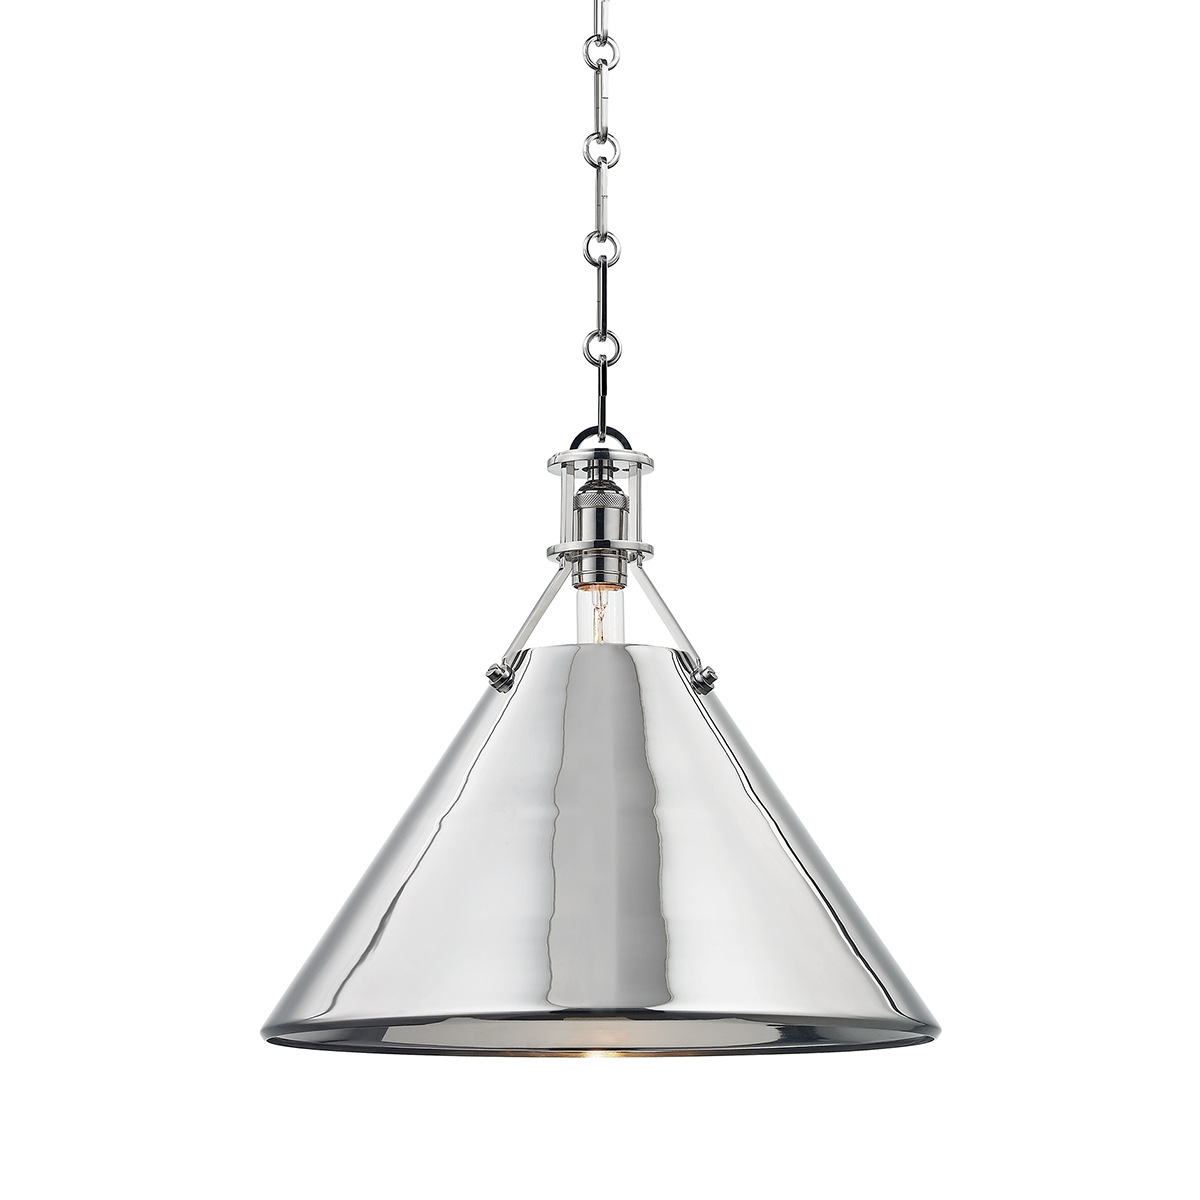 Steel Open Air Cone Shade Pendant